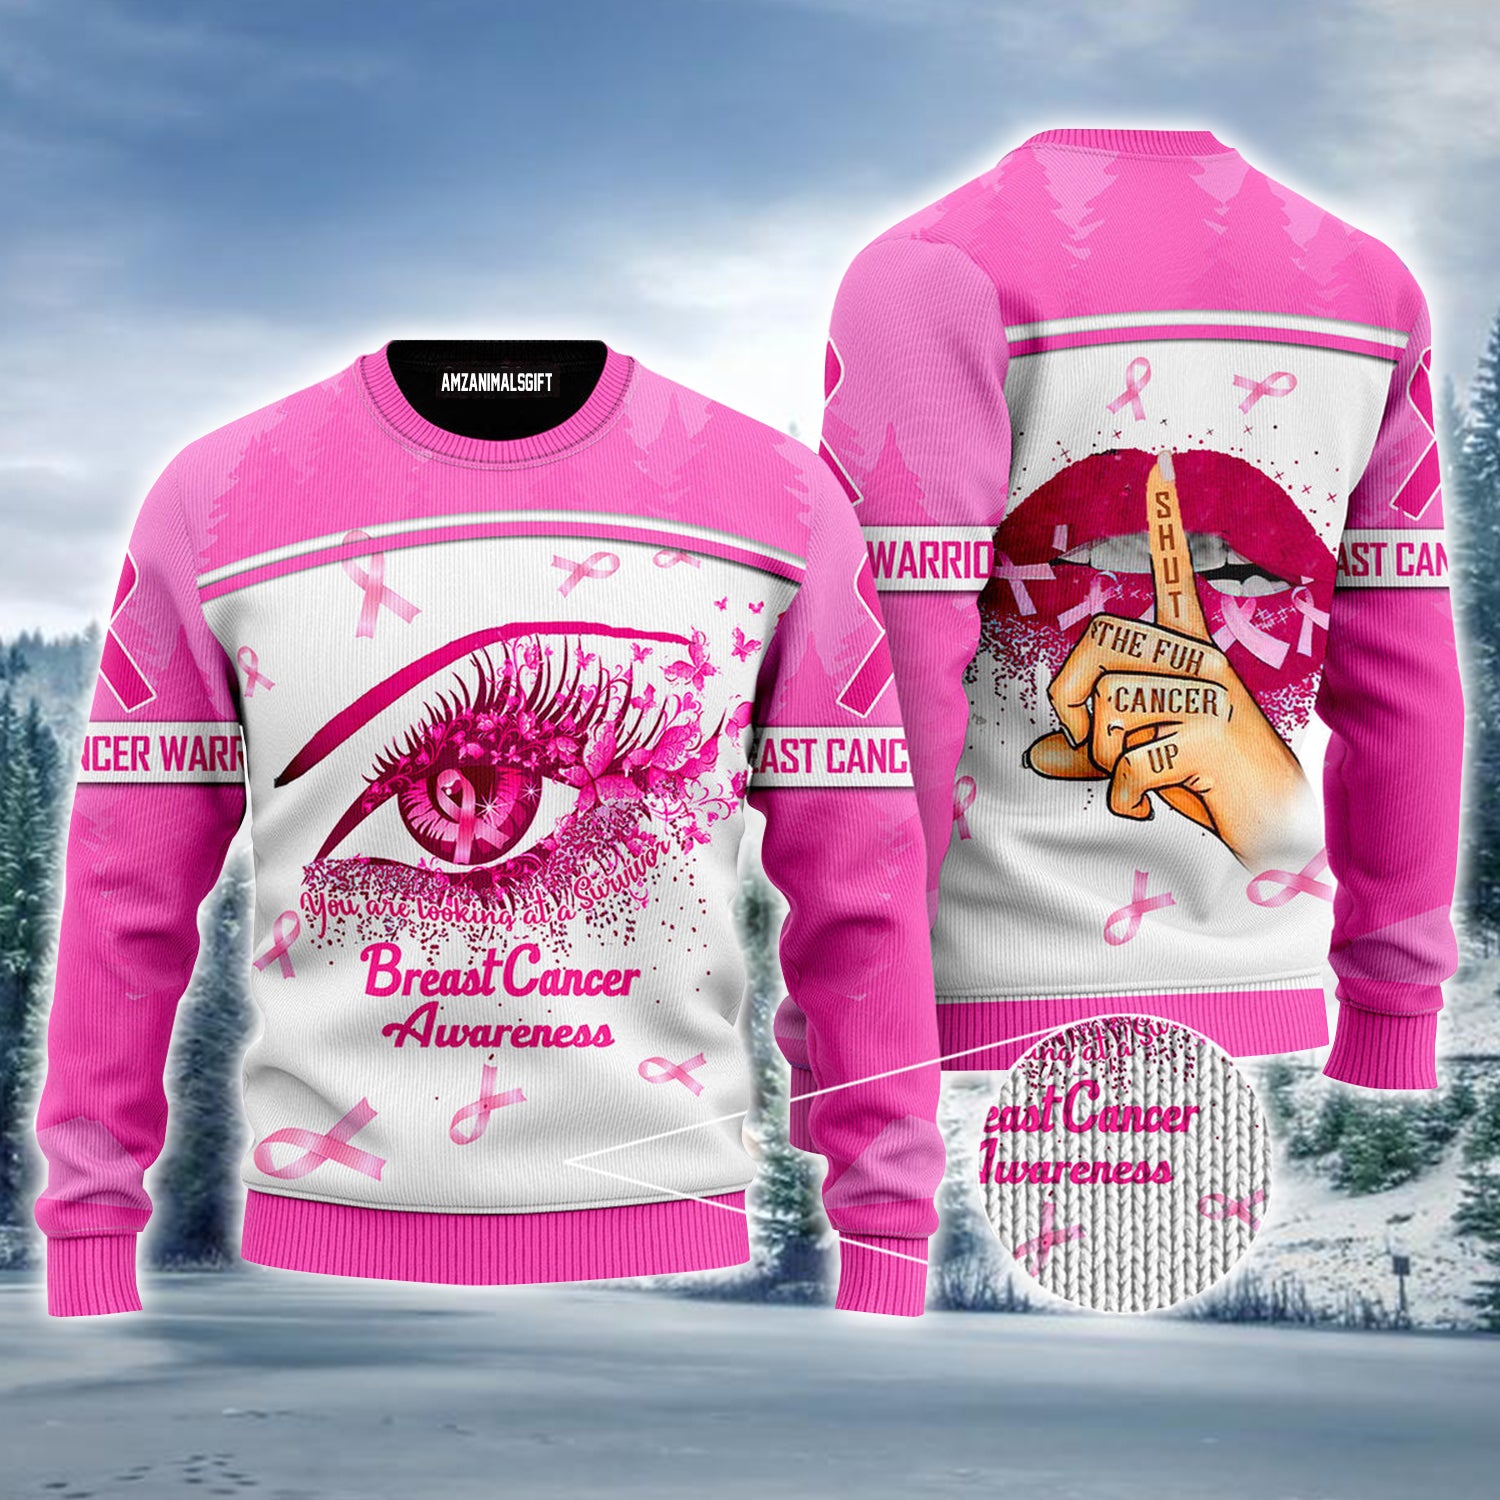 Breast Cancer Awareness Ugly Sweater, Shut The Fuh Cancer Up Ugly Sweater For Men & Women - Perfect Gift For Christmas, Family, Friends